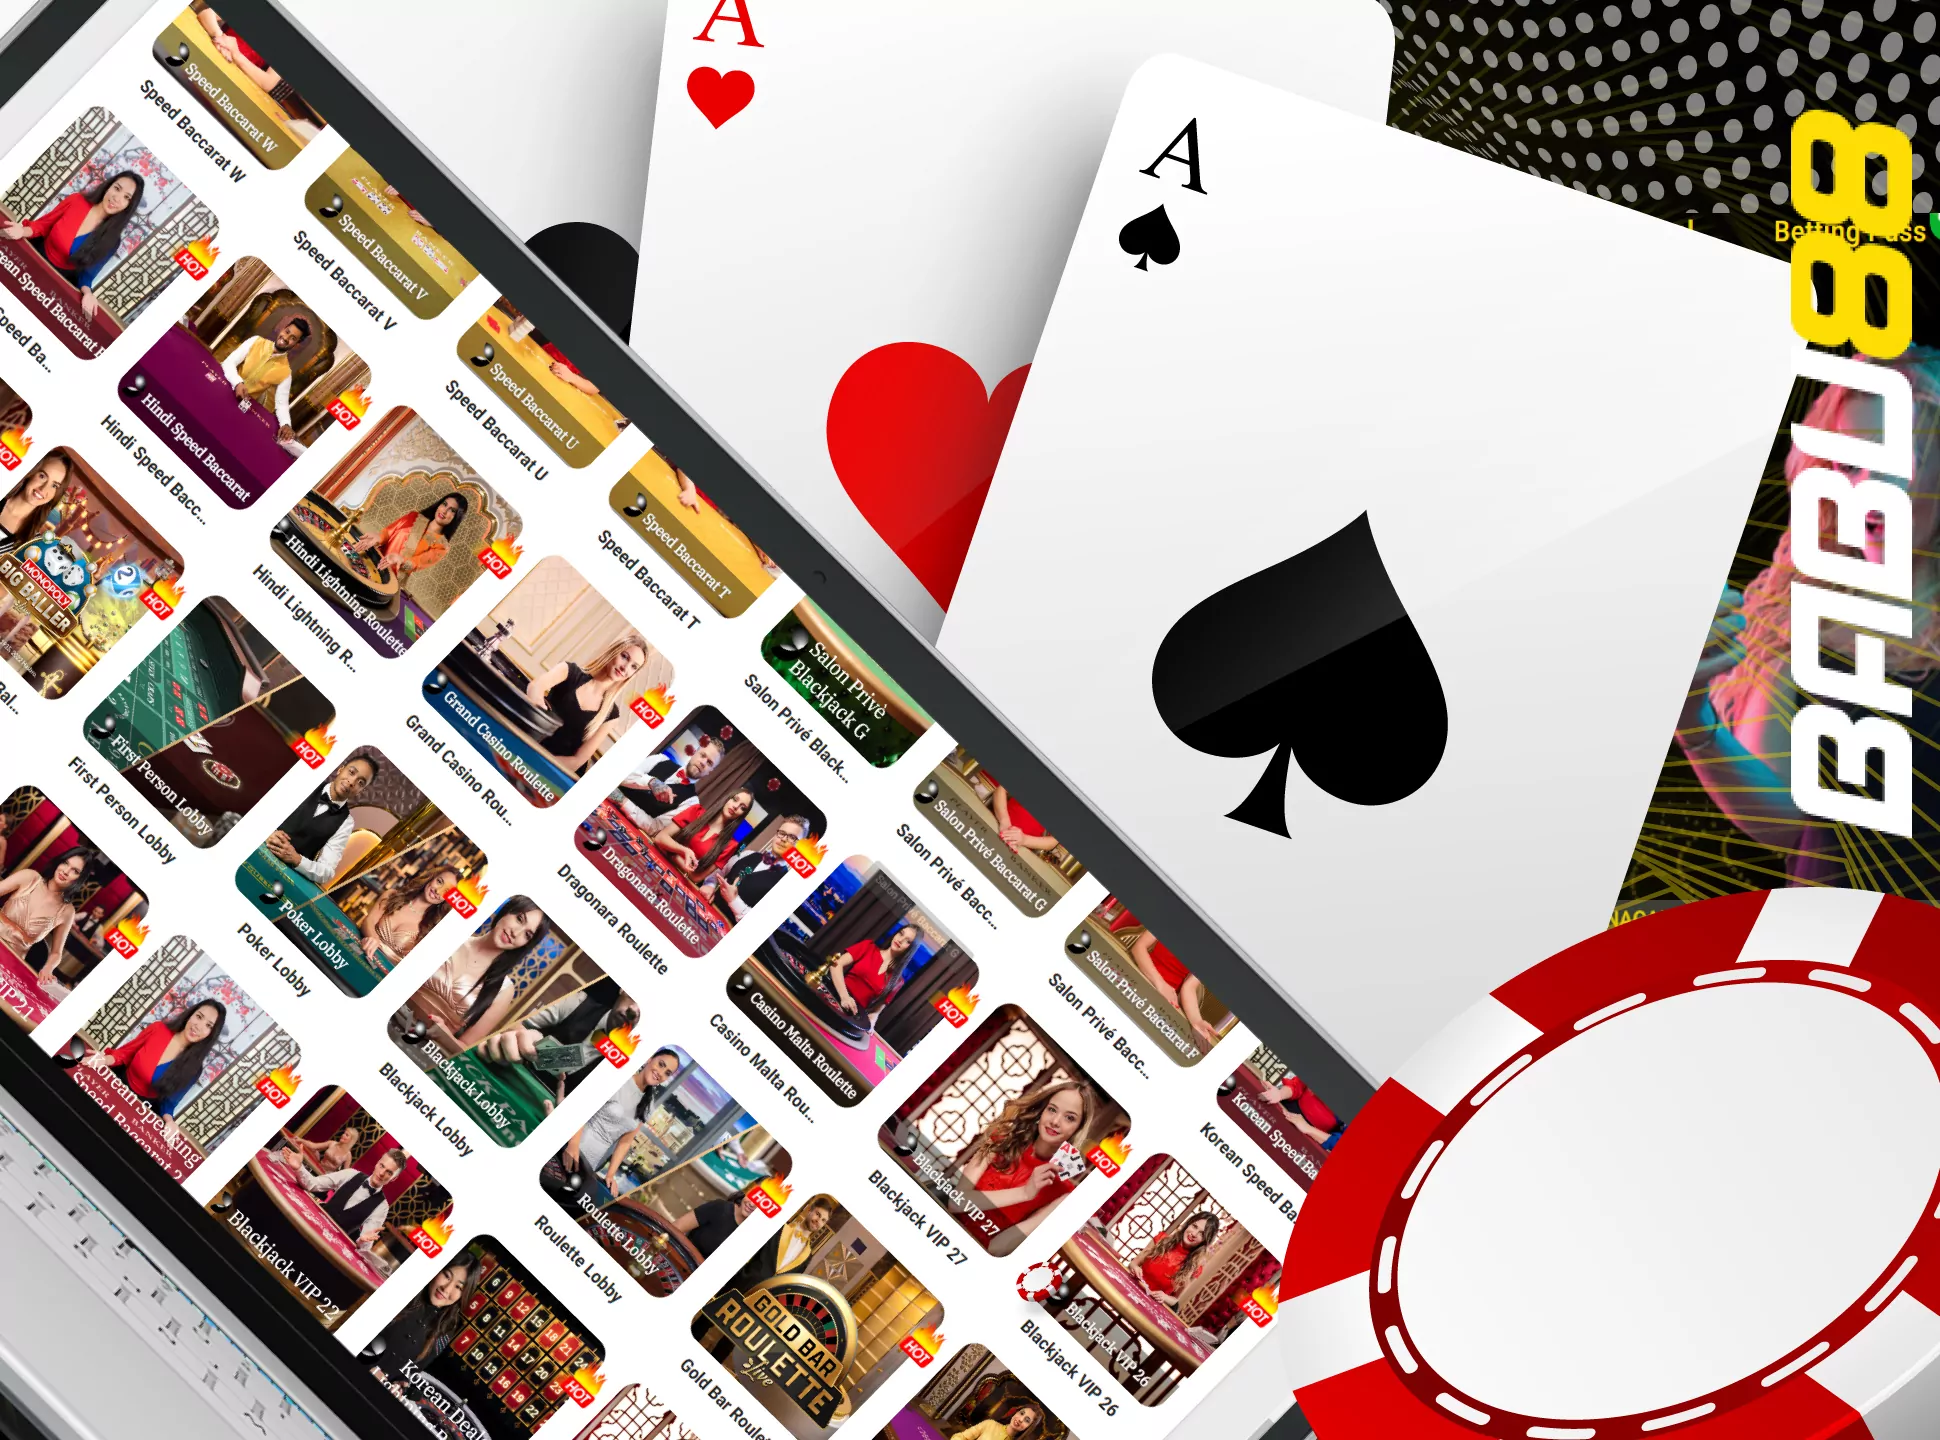 Poker is one of the most popular game in the MarvelBet casino.